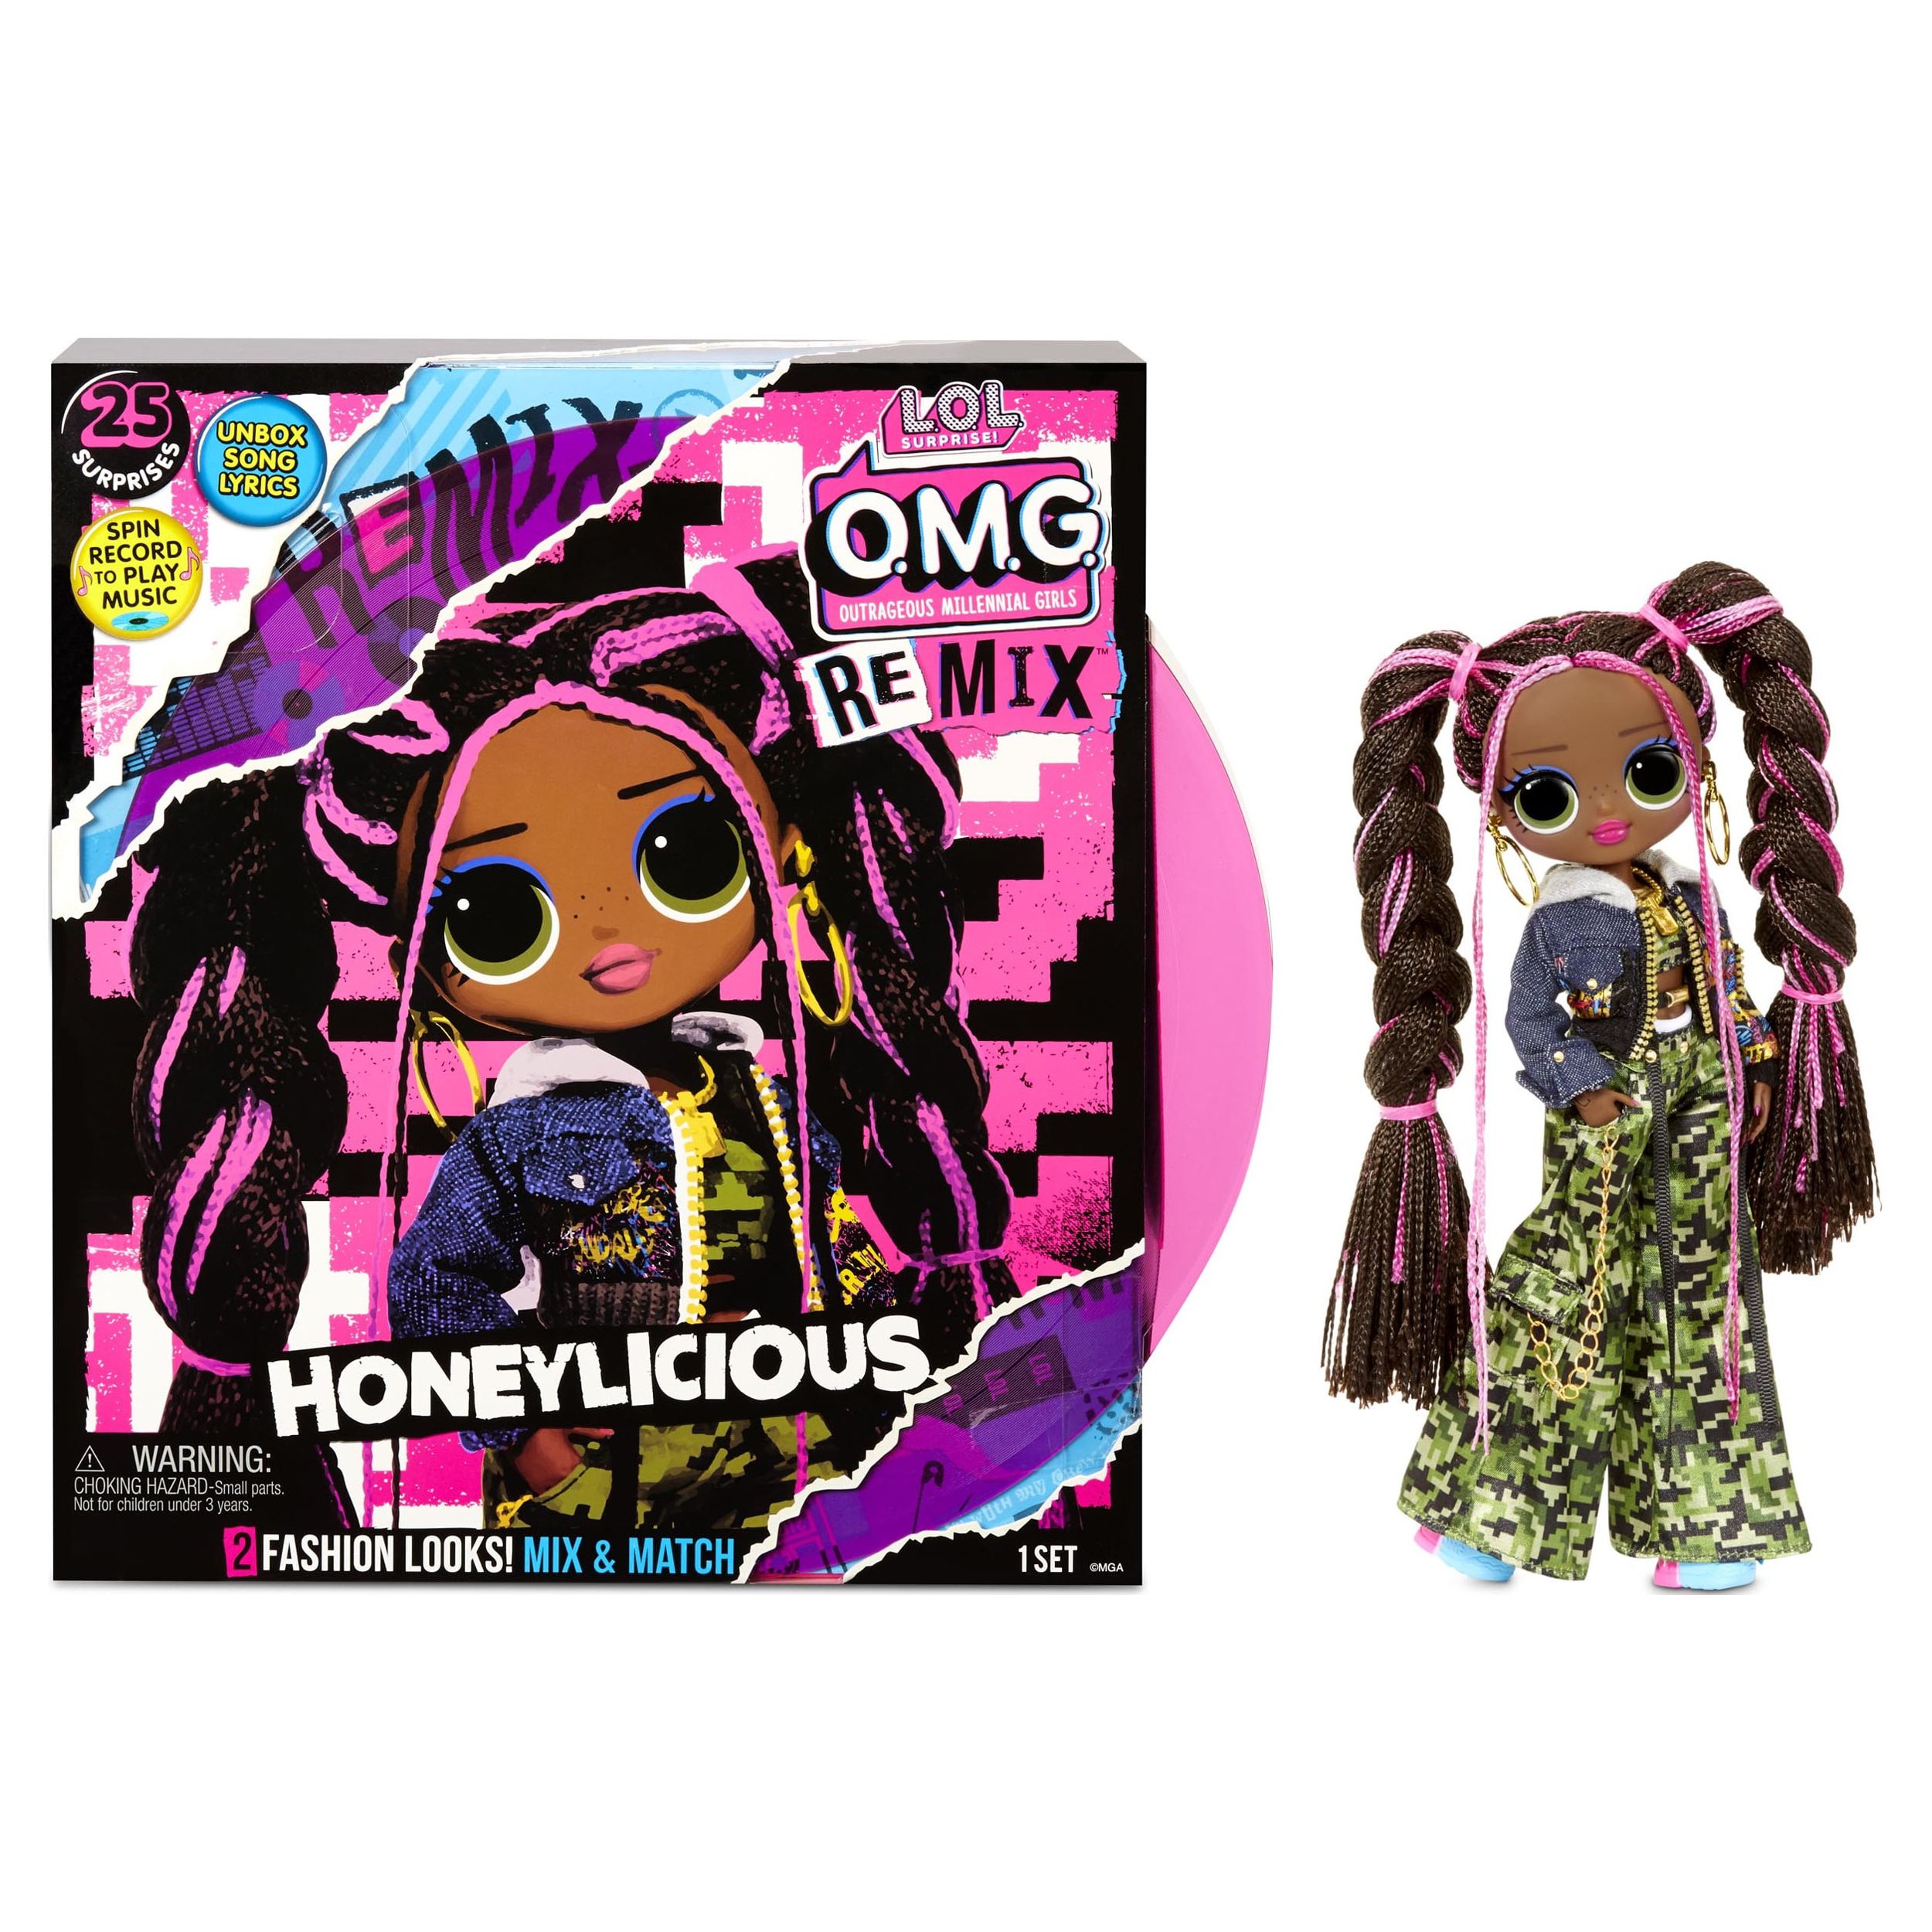 LOL Surprise OMG Remix Honeylicious Fashion Doll - 25 Surprises With Music Age 5+ - image 1 of 9